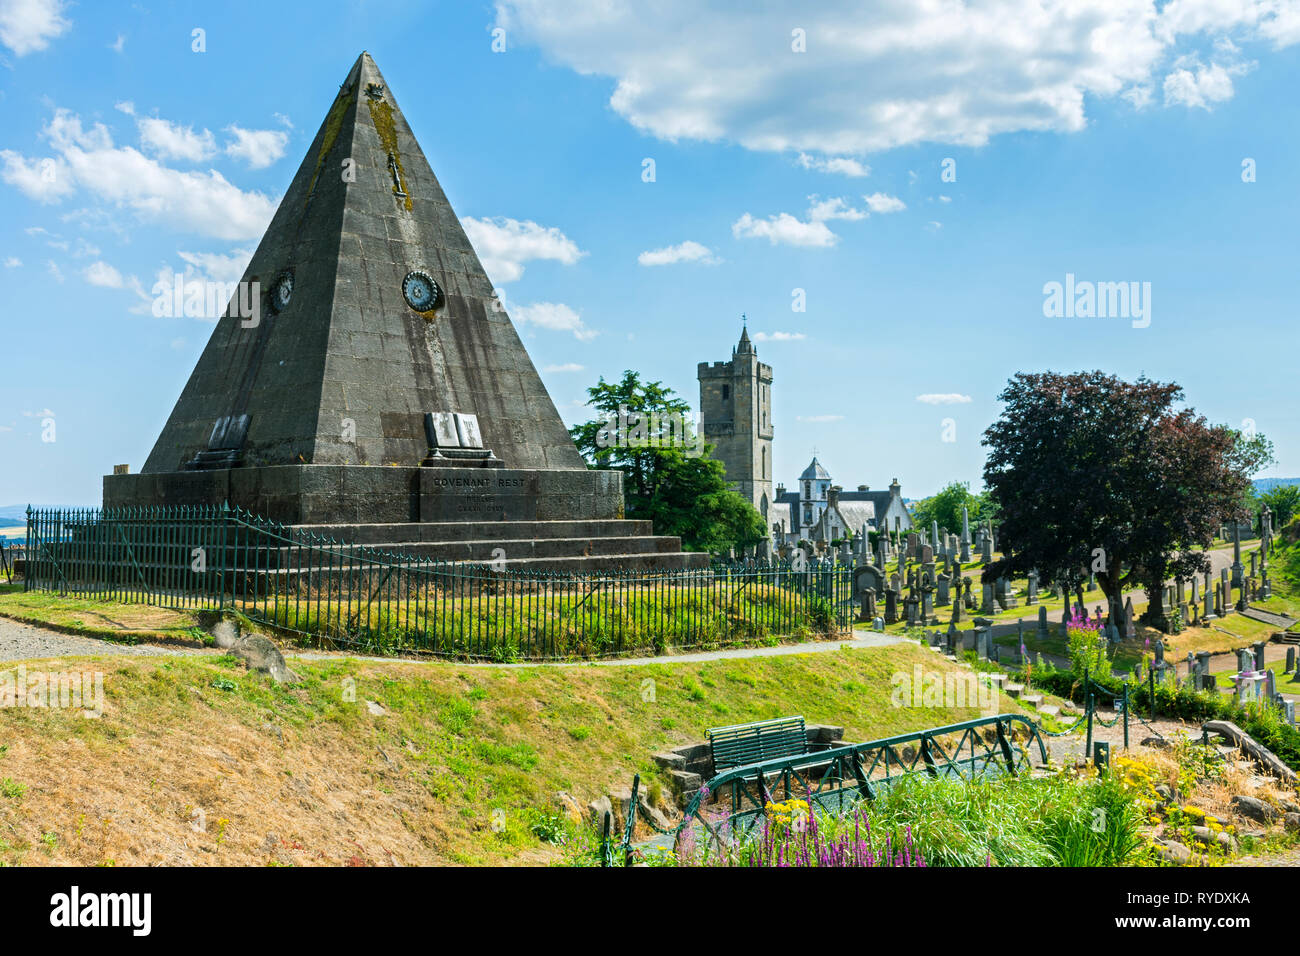 The Star Pyramid in the Old Town Cemetery at the Church of the Holy Rude, Stirling, Stirlingshire, Scotland, UK Stock Photo